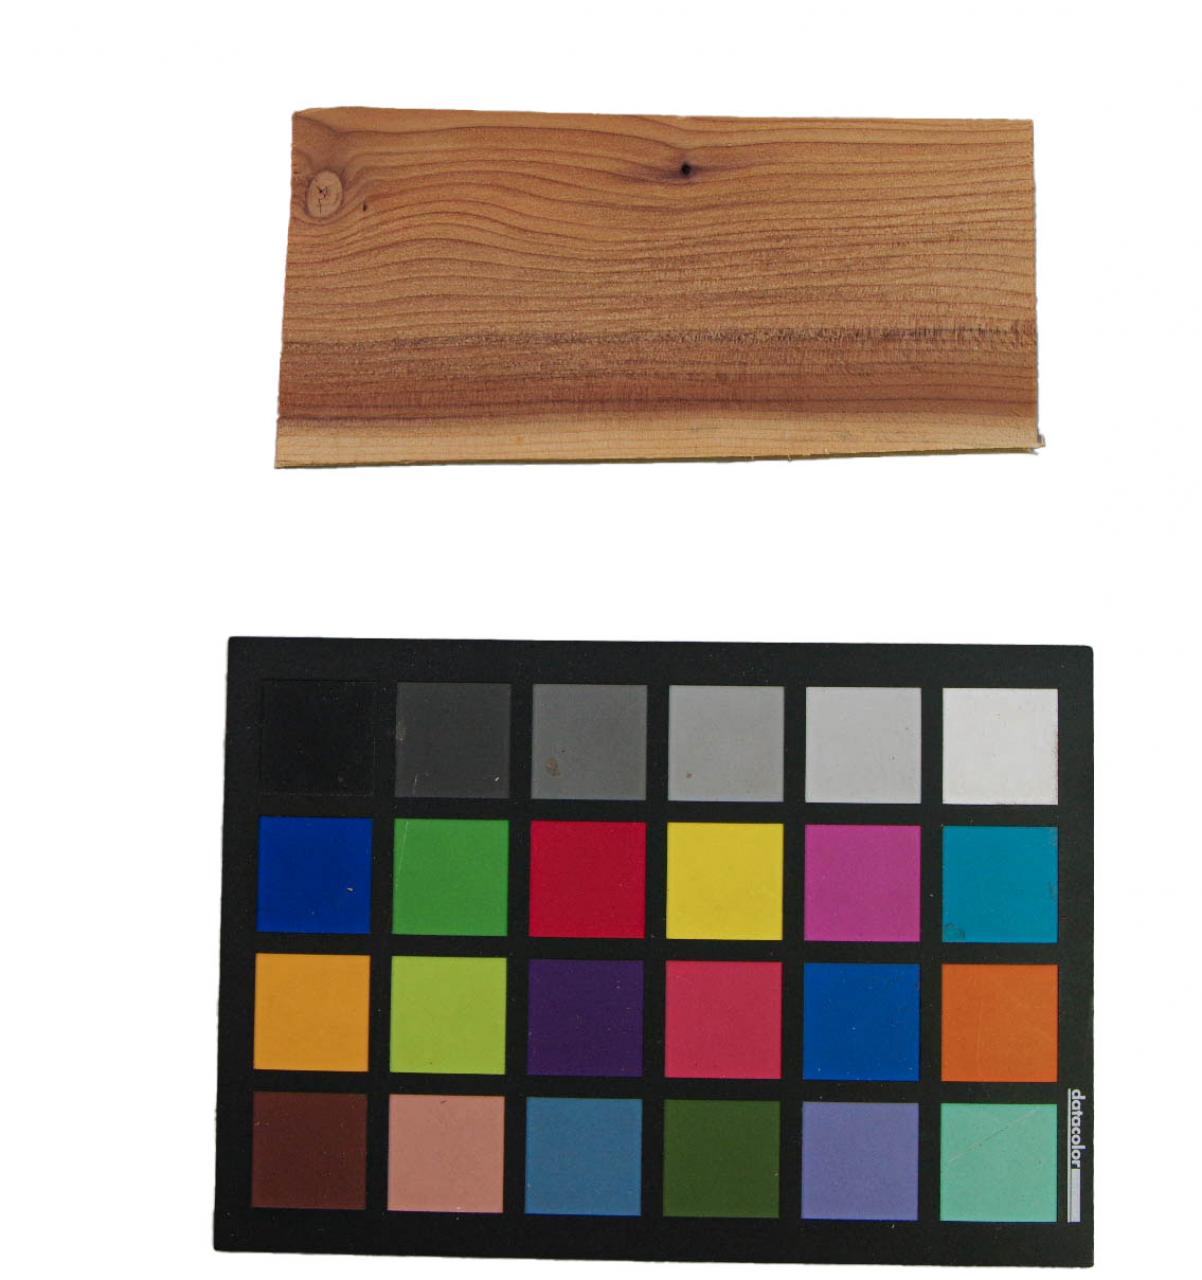 Yewtree, veneer with Colour reference card